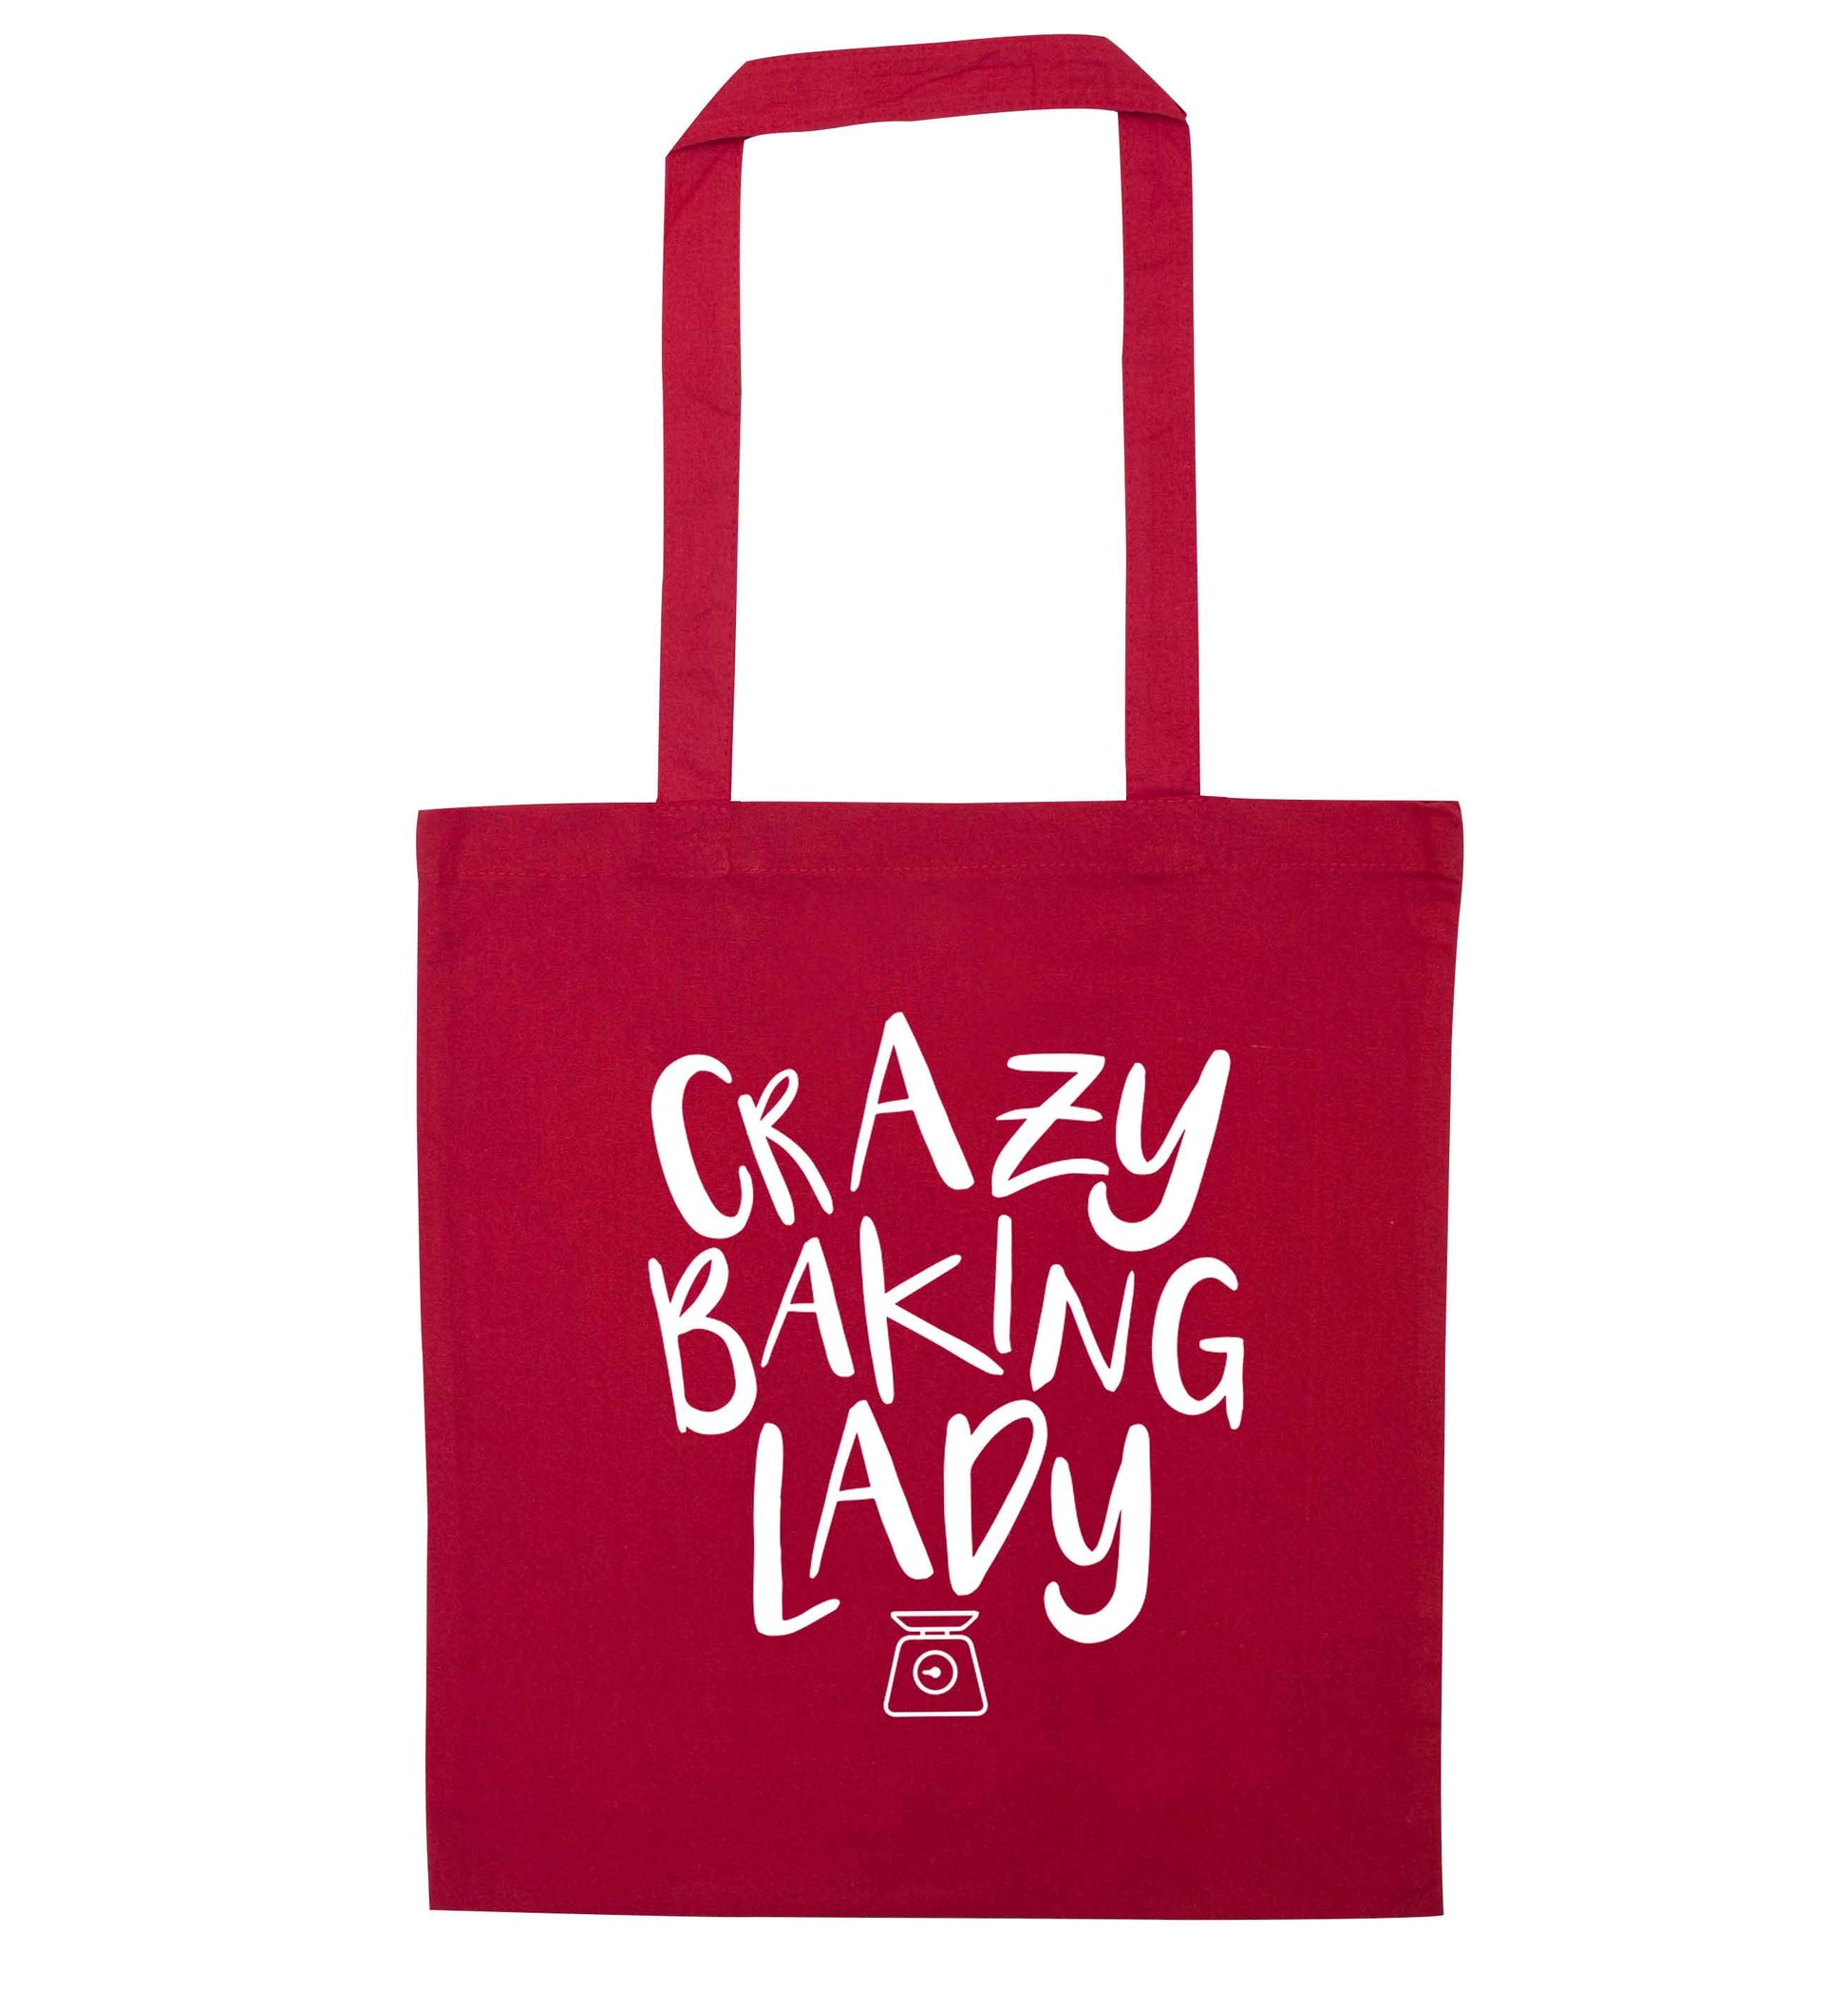 Crazy baking lady red tote bag